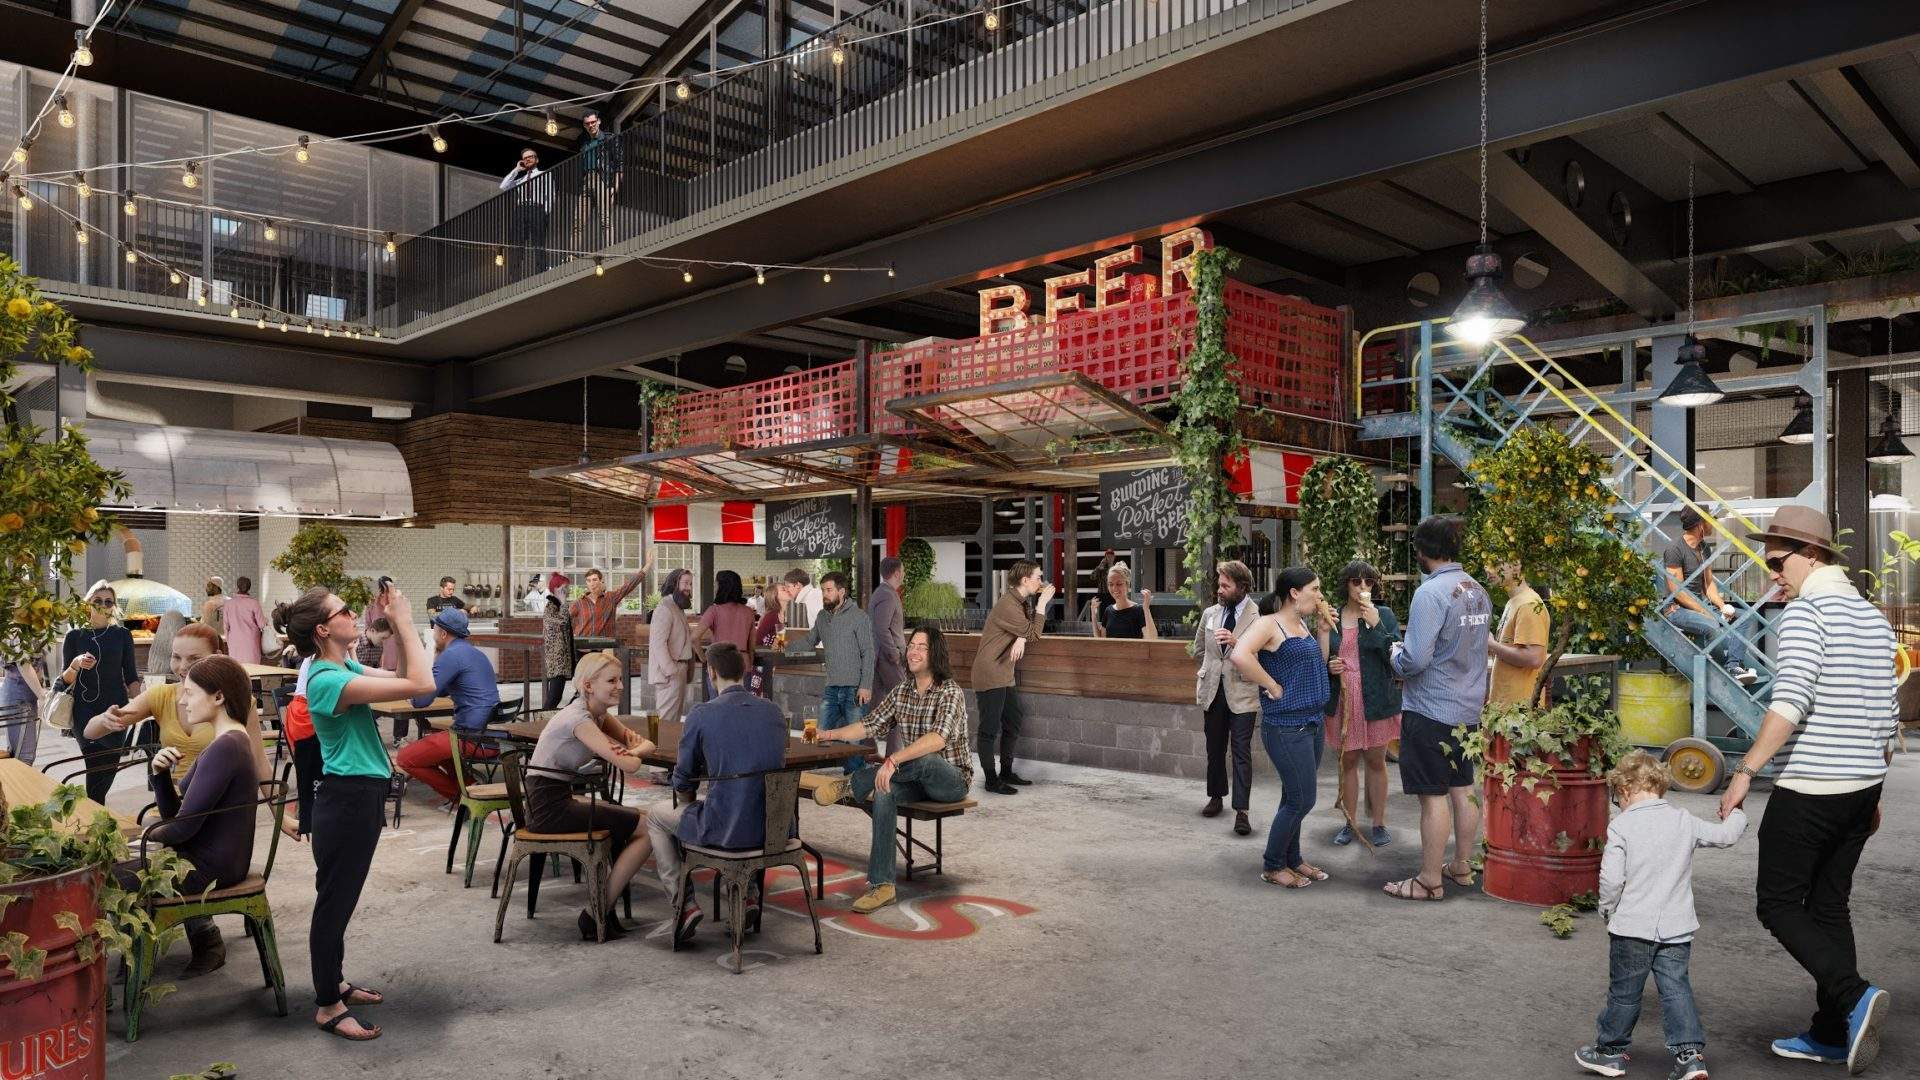 The Opening Date Has Been Announced for Auckland's First Little Creatures Brewery